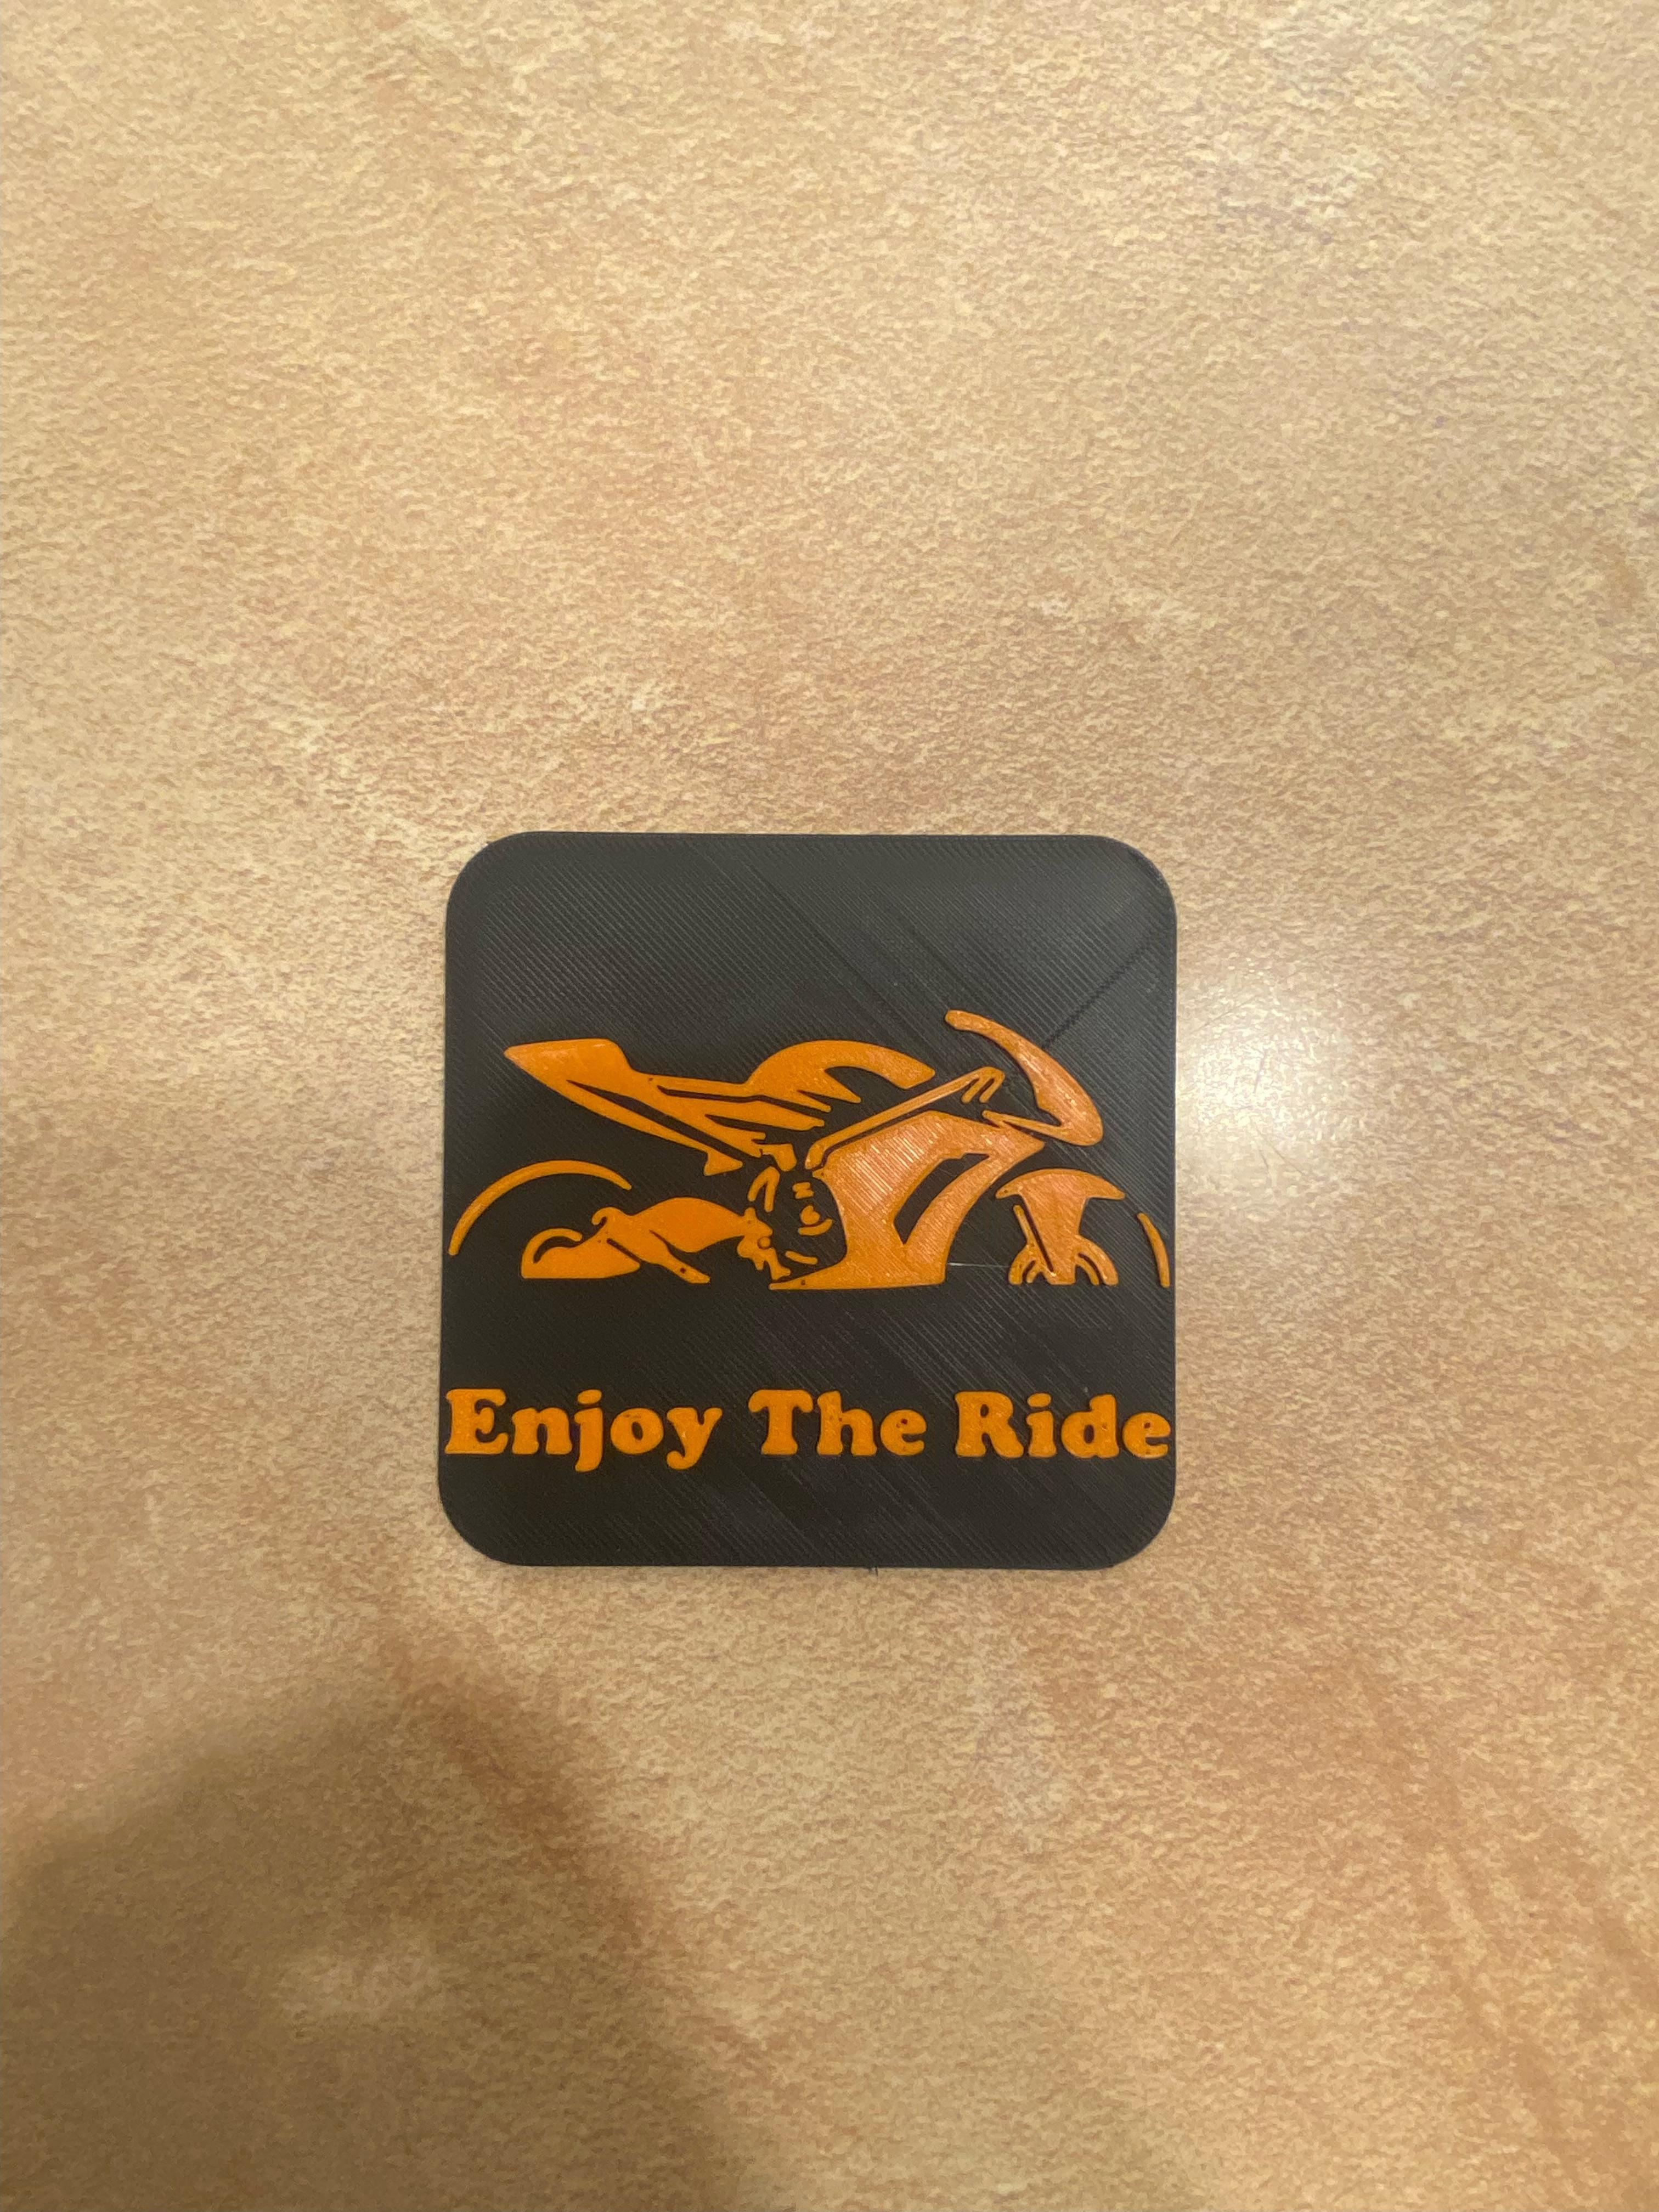 enjoy the ride motorcycle themed beverage coaster 3d model